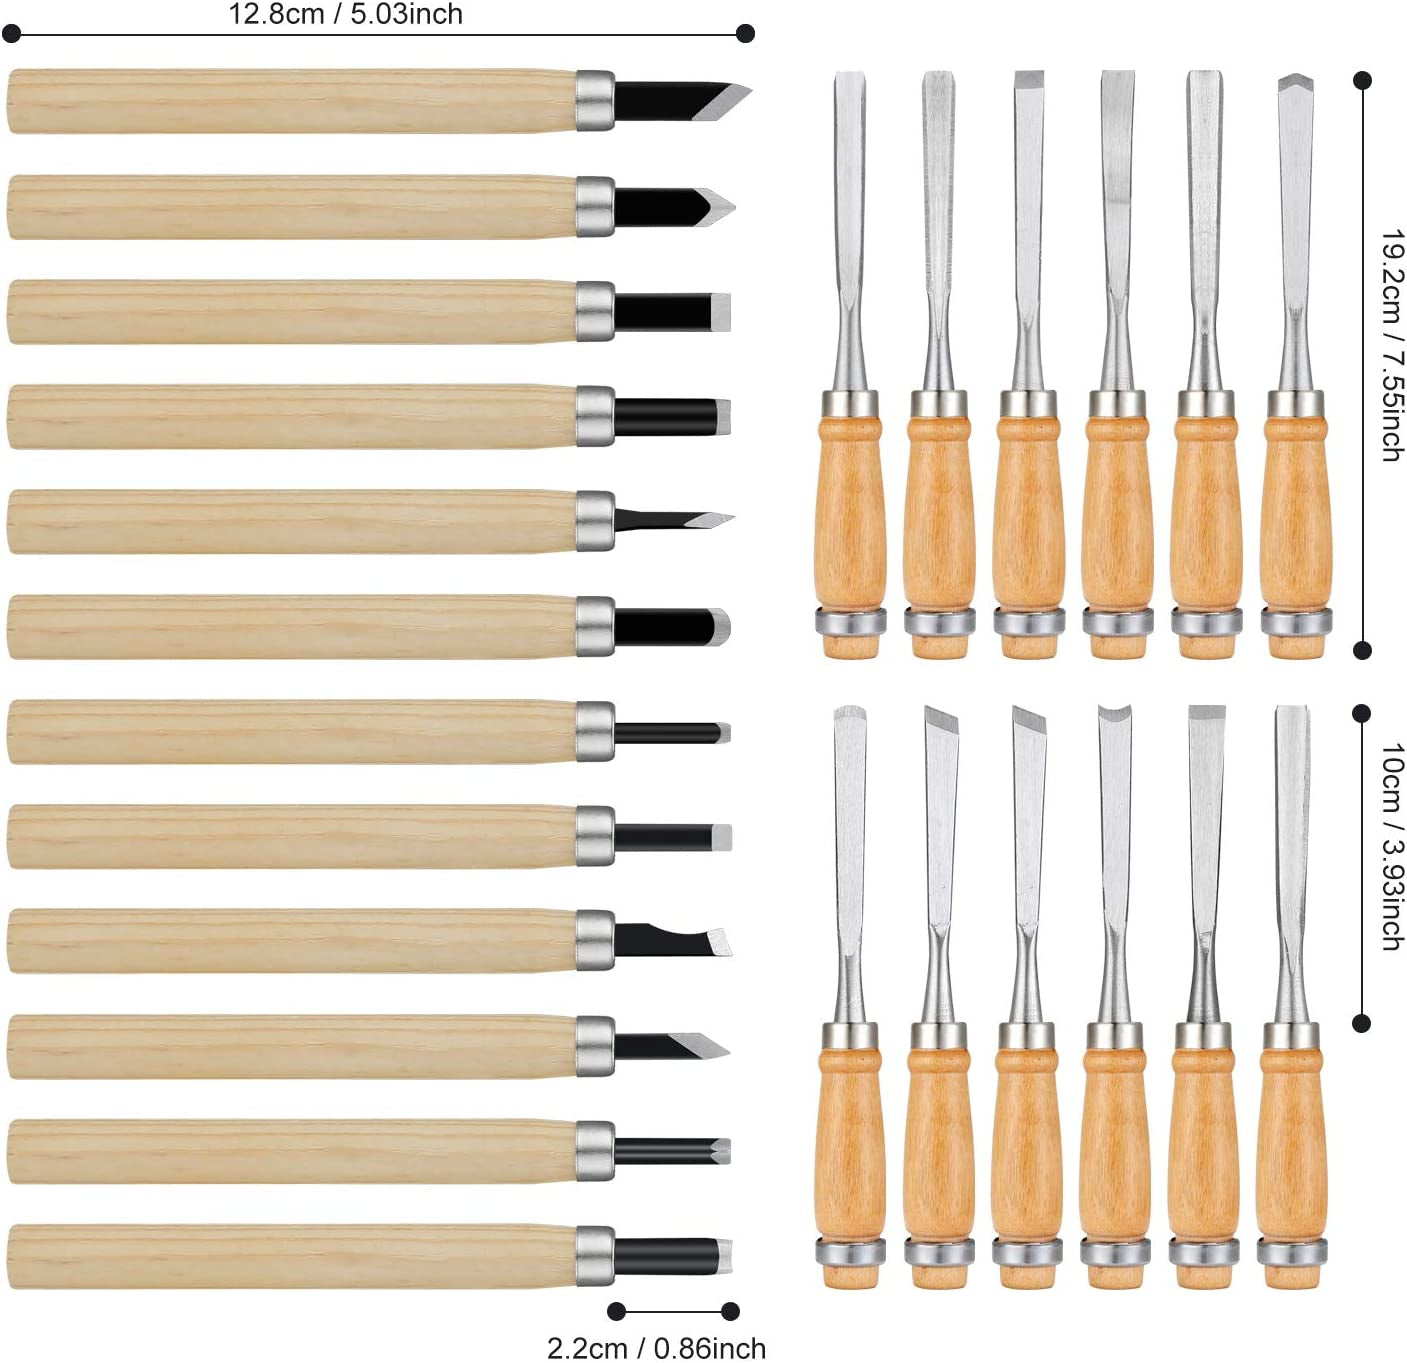 24Pcs Wood Carving Chisel Set Wood Carving Kit Including Small and Large Size Wood Carver Set